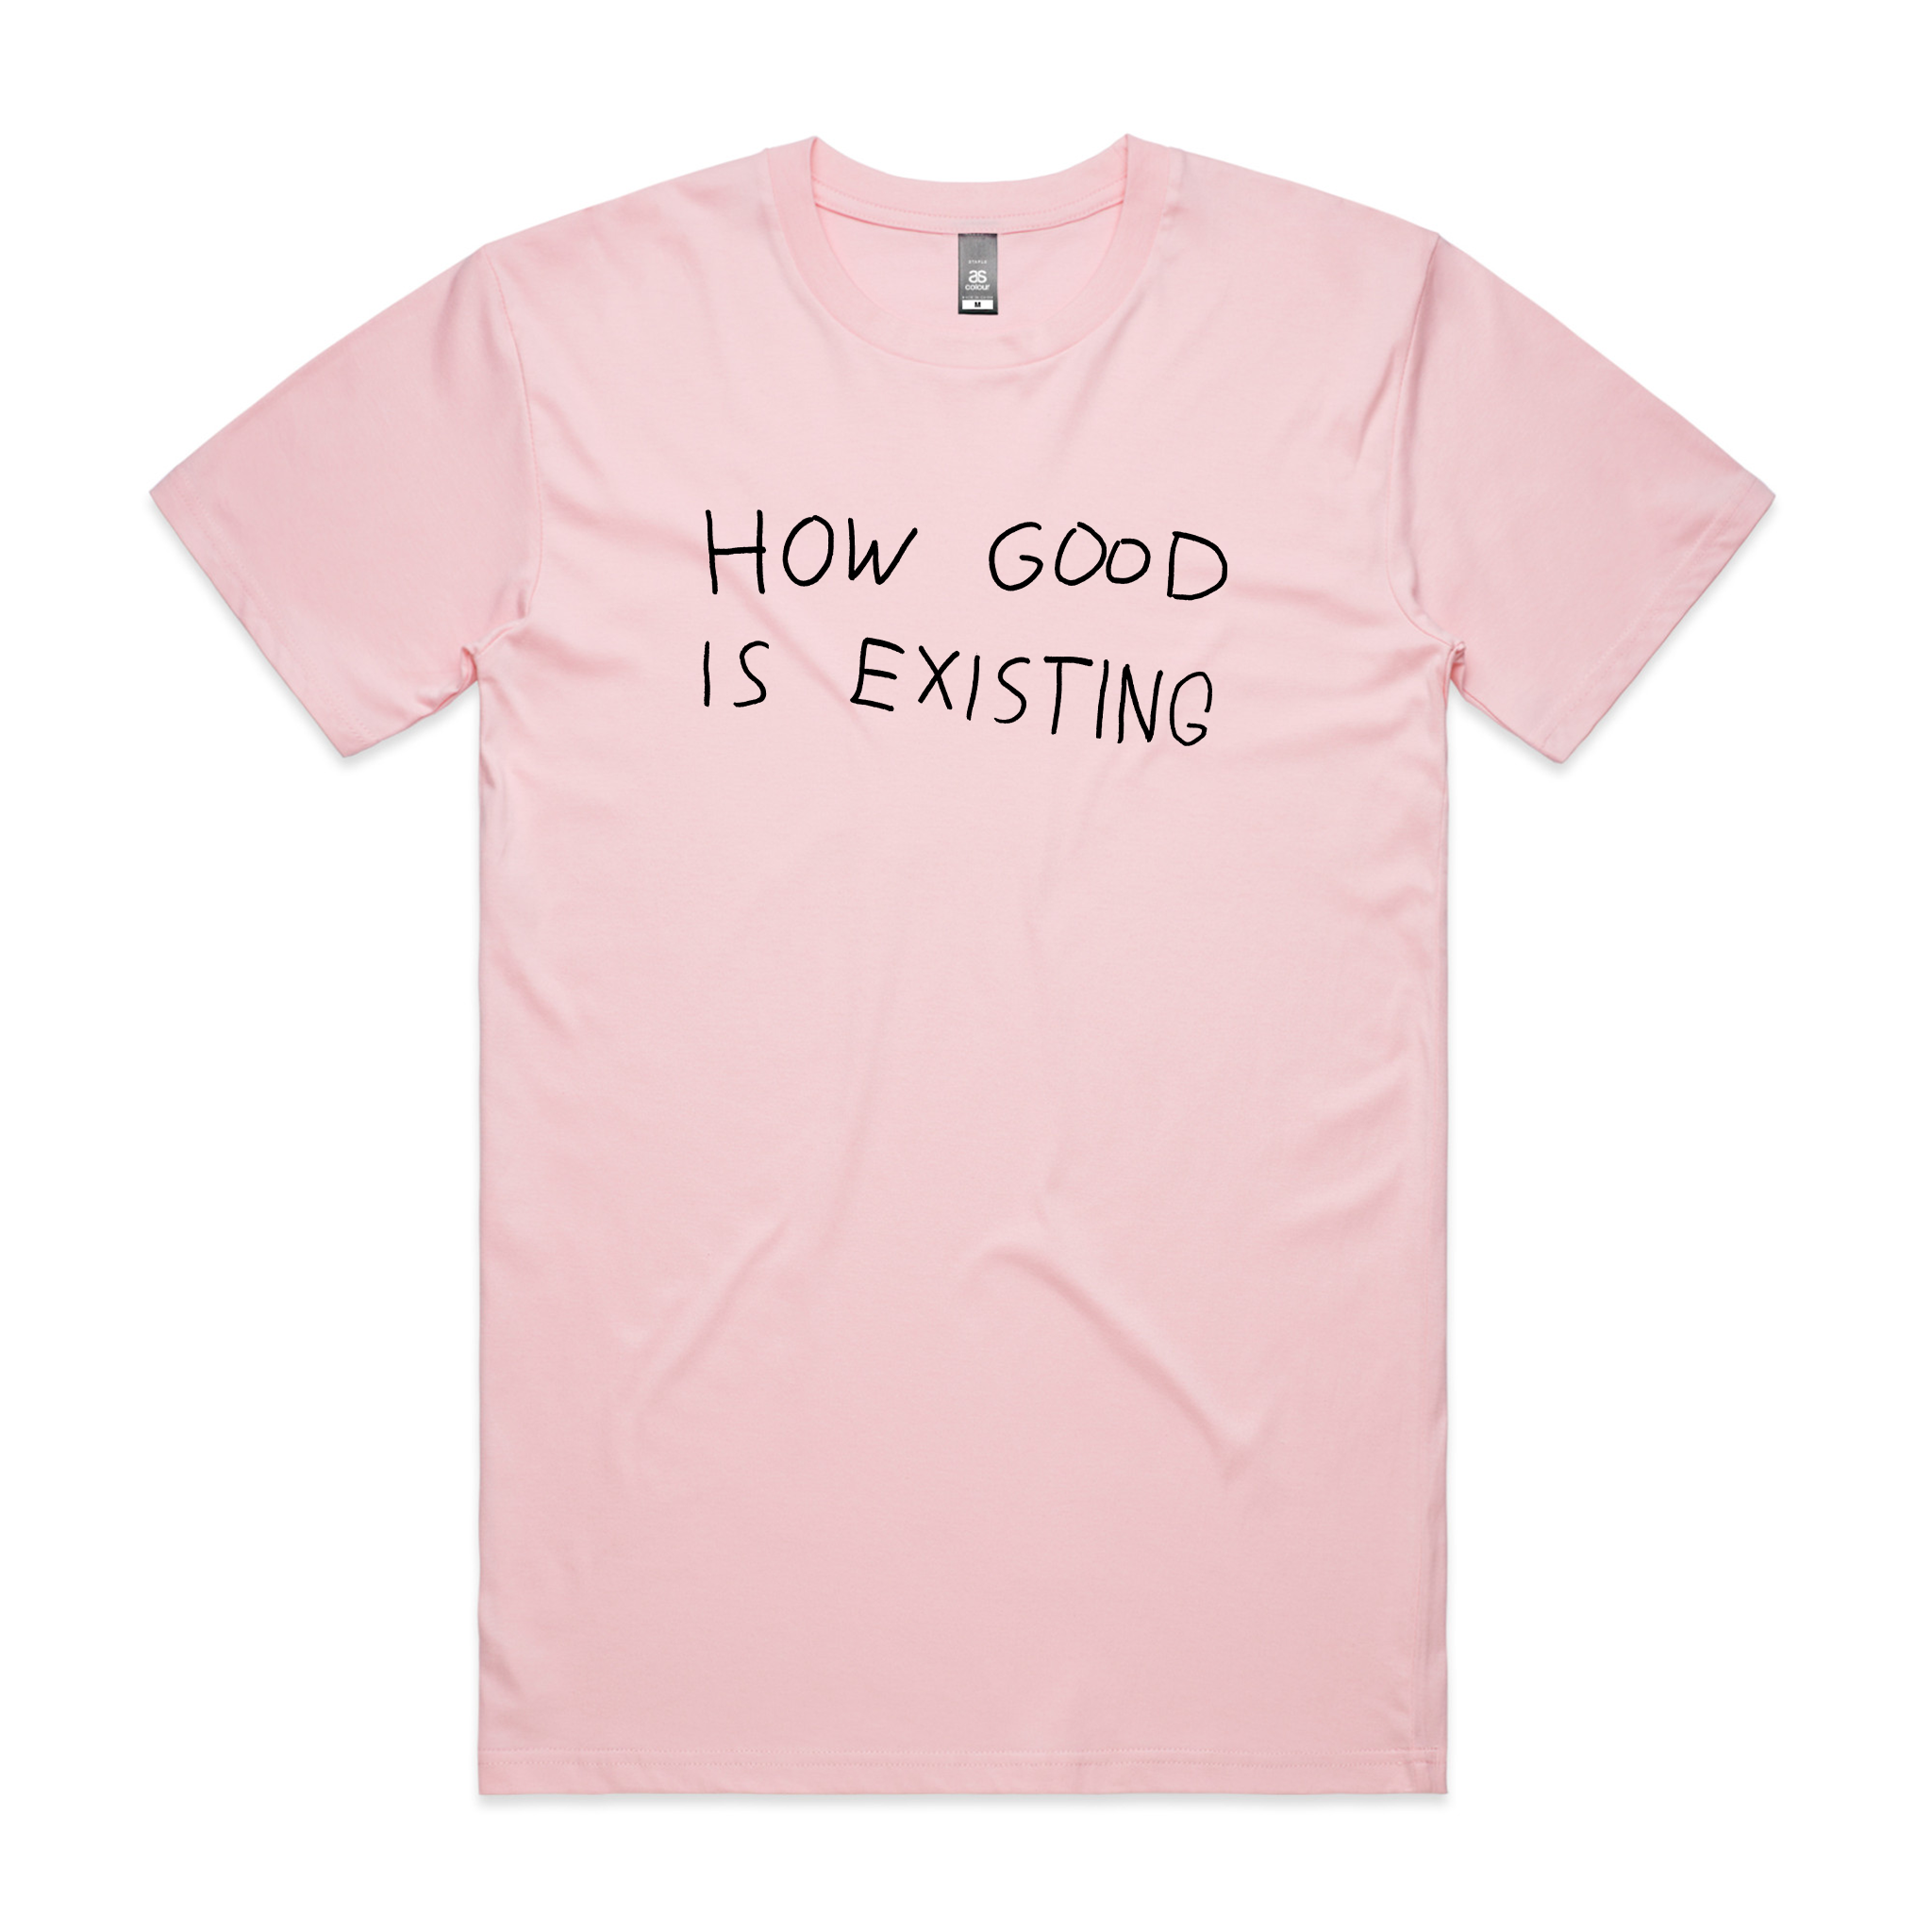 How Good Is Existing Tee